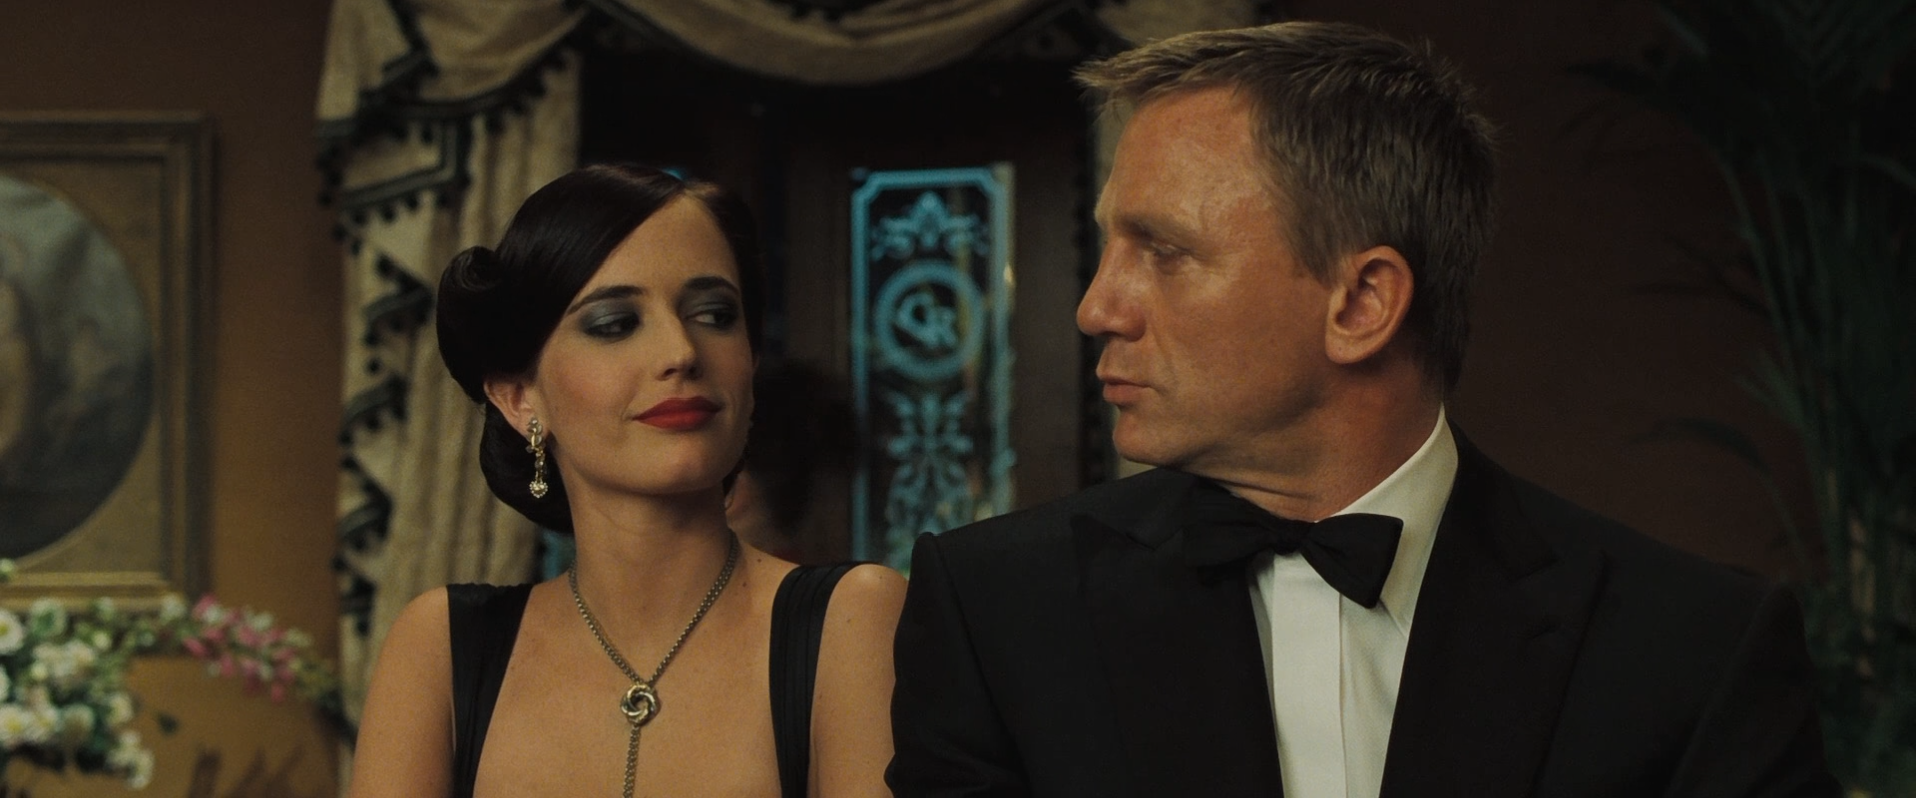 1916x798 > Casino Royale Wallpapers